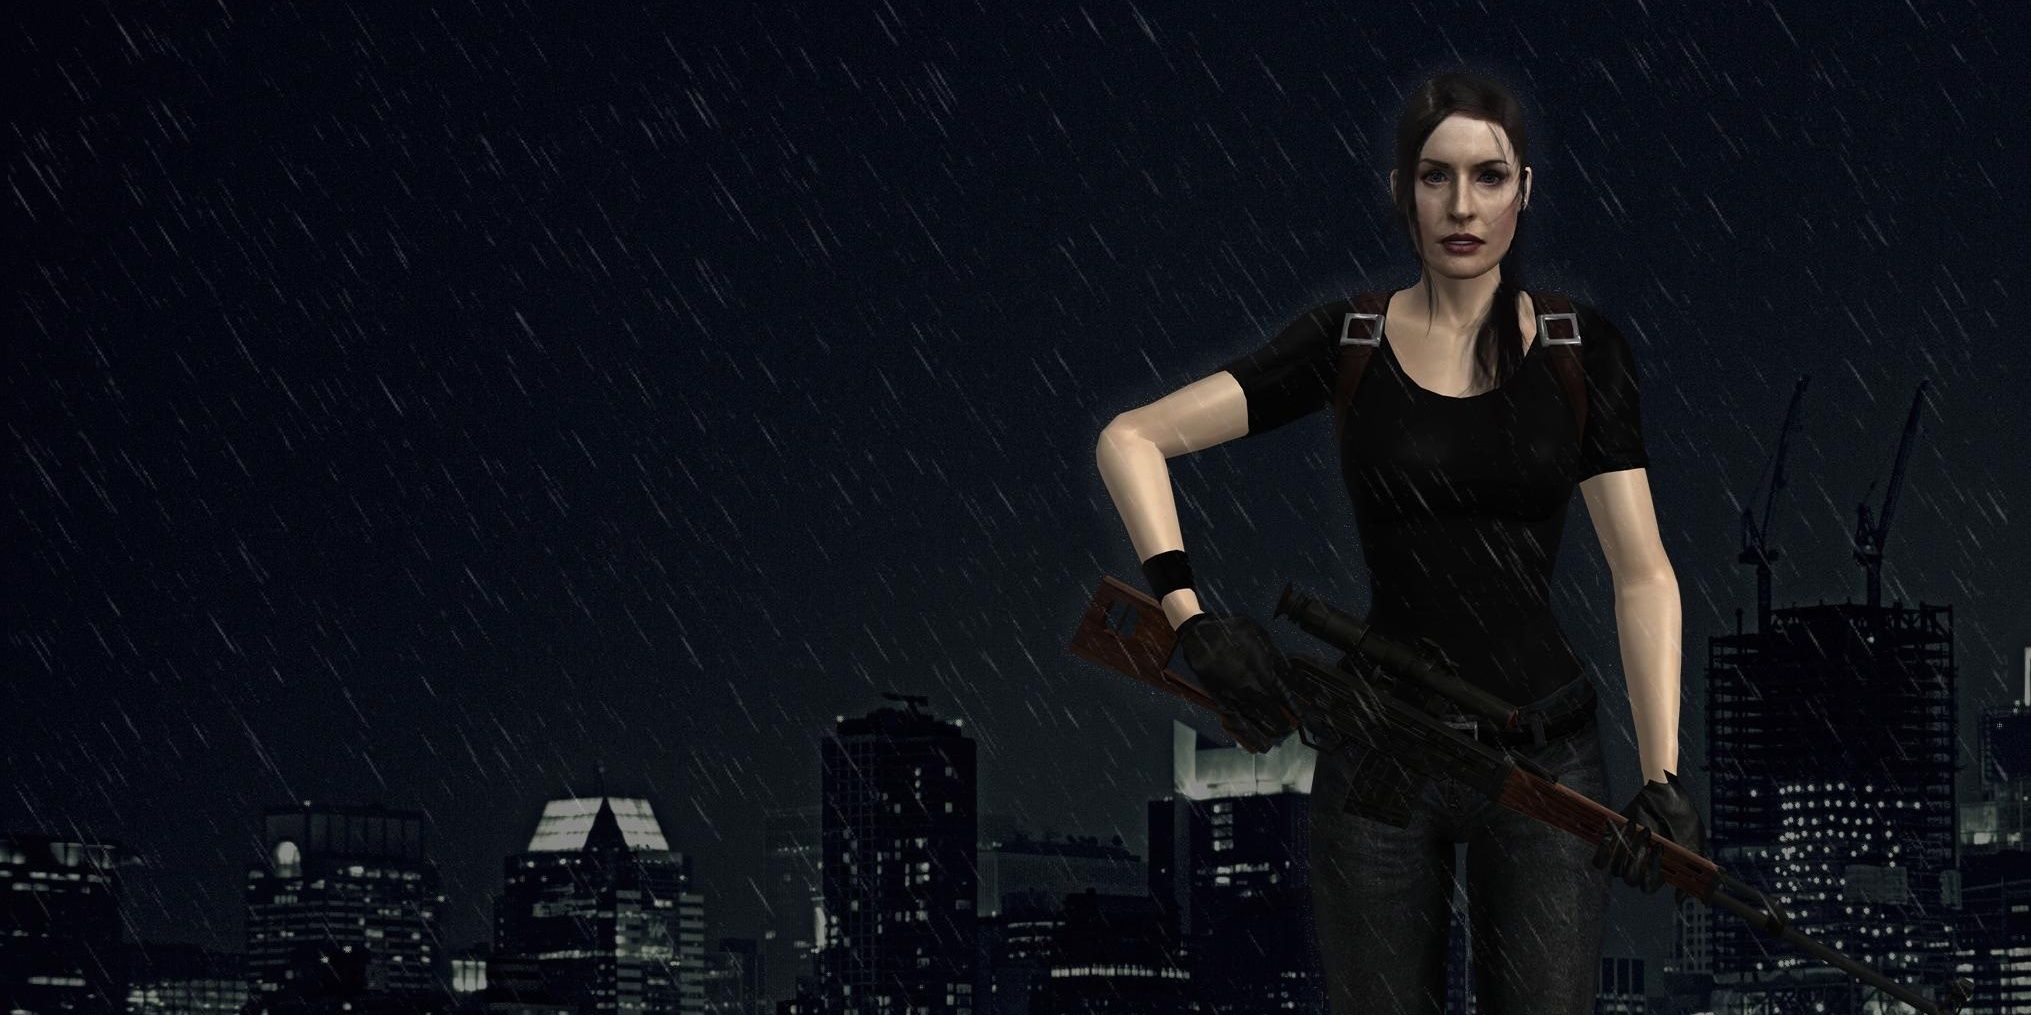 Mona Sax from Max Payne 2 - The Fall of Max Payne